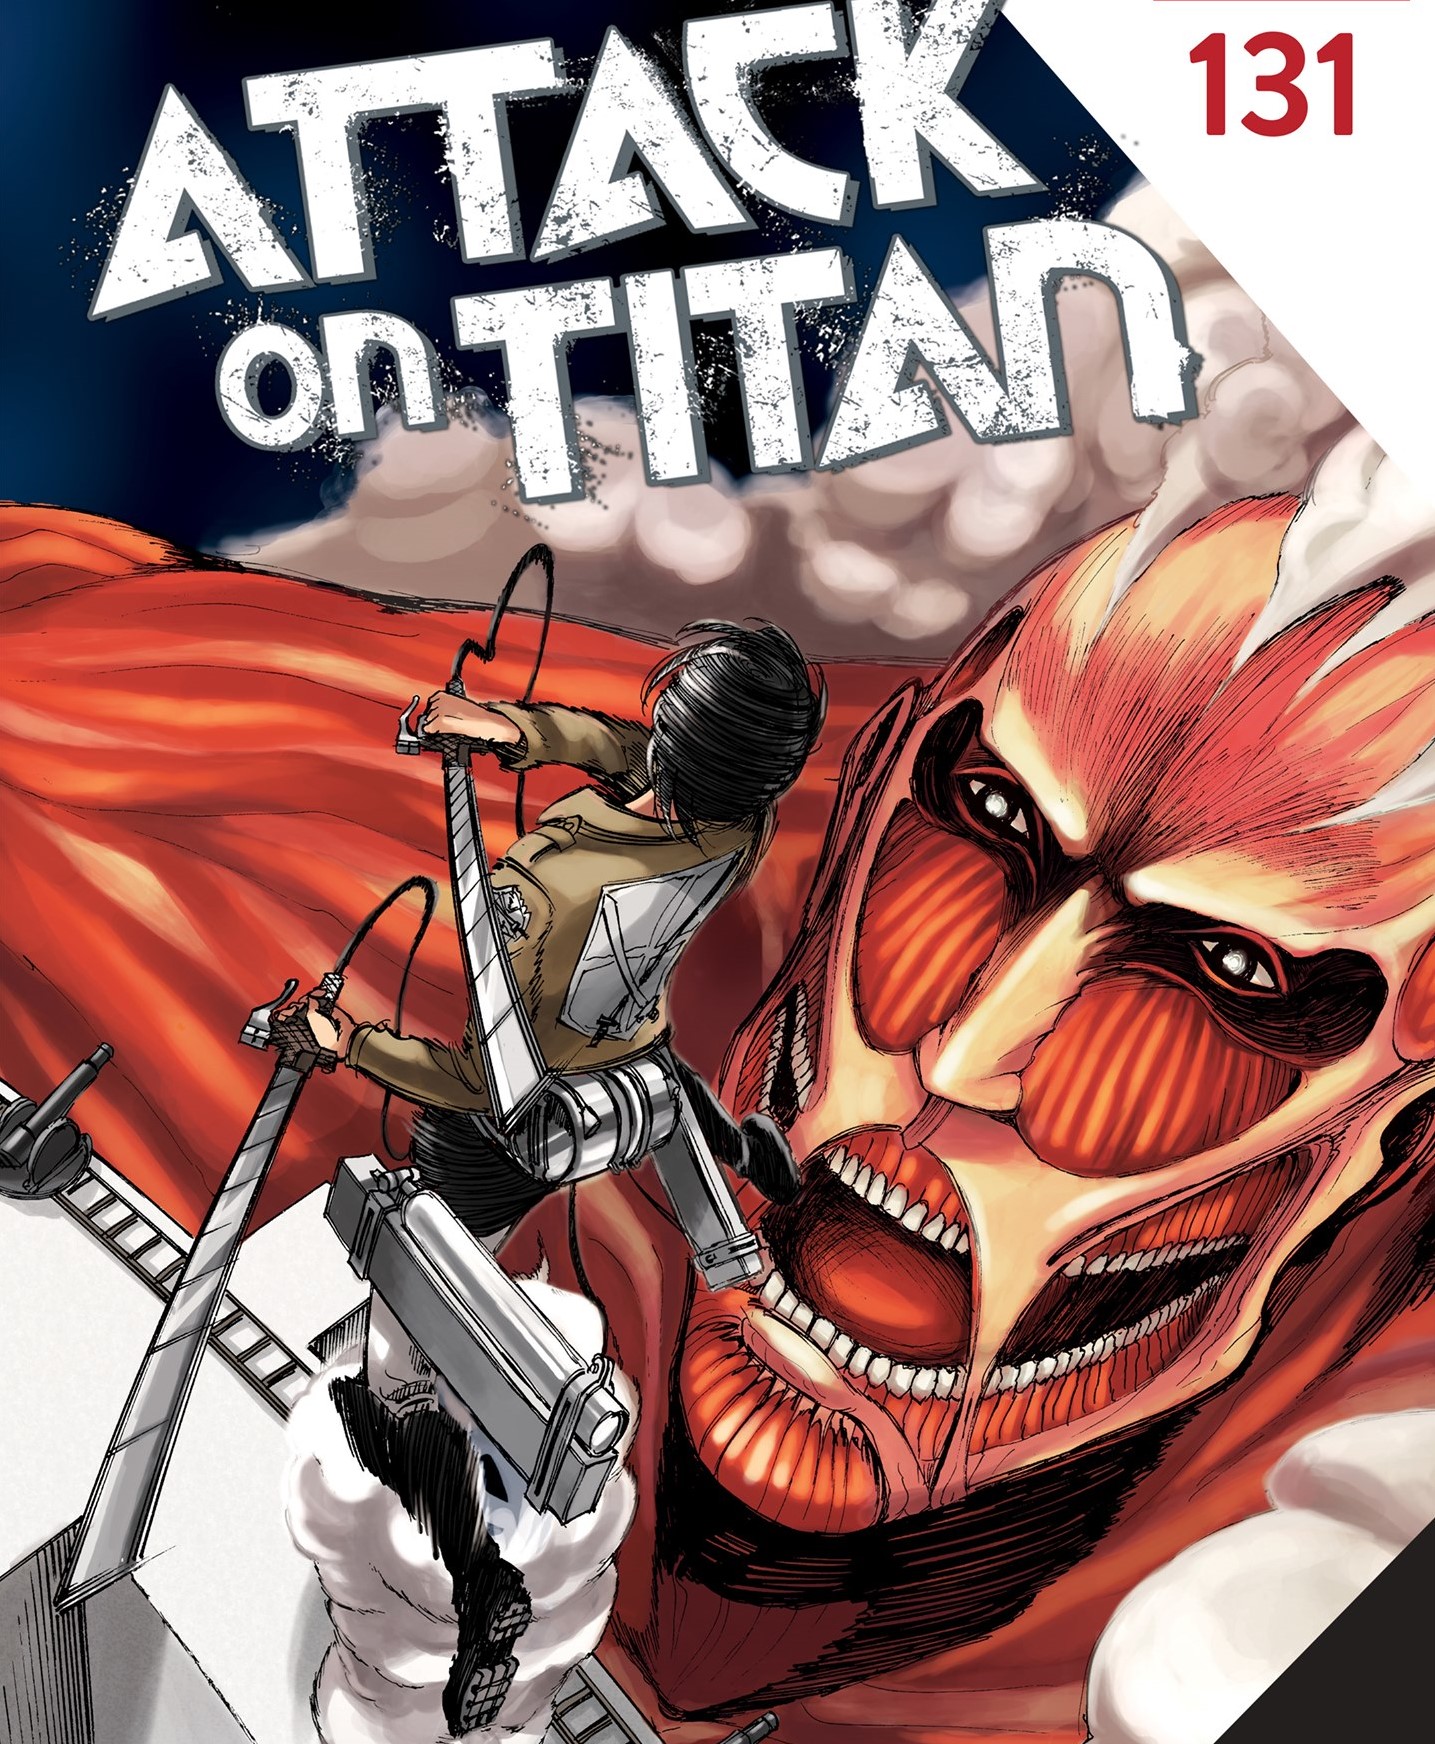 Attack on Titan Chapter 138: Will Eren commit genocide or die? Know more in details!